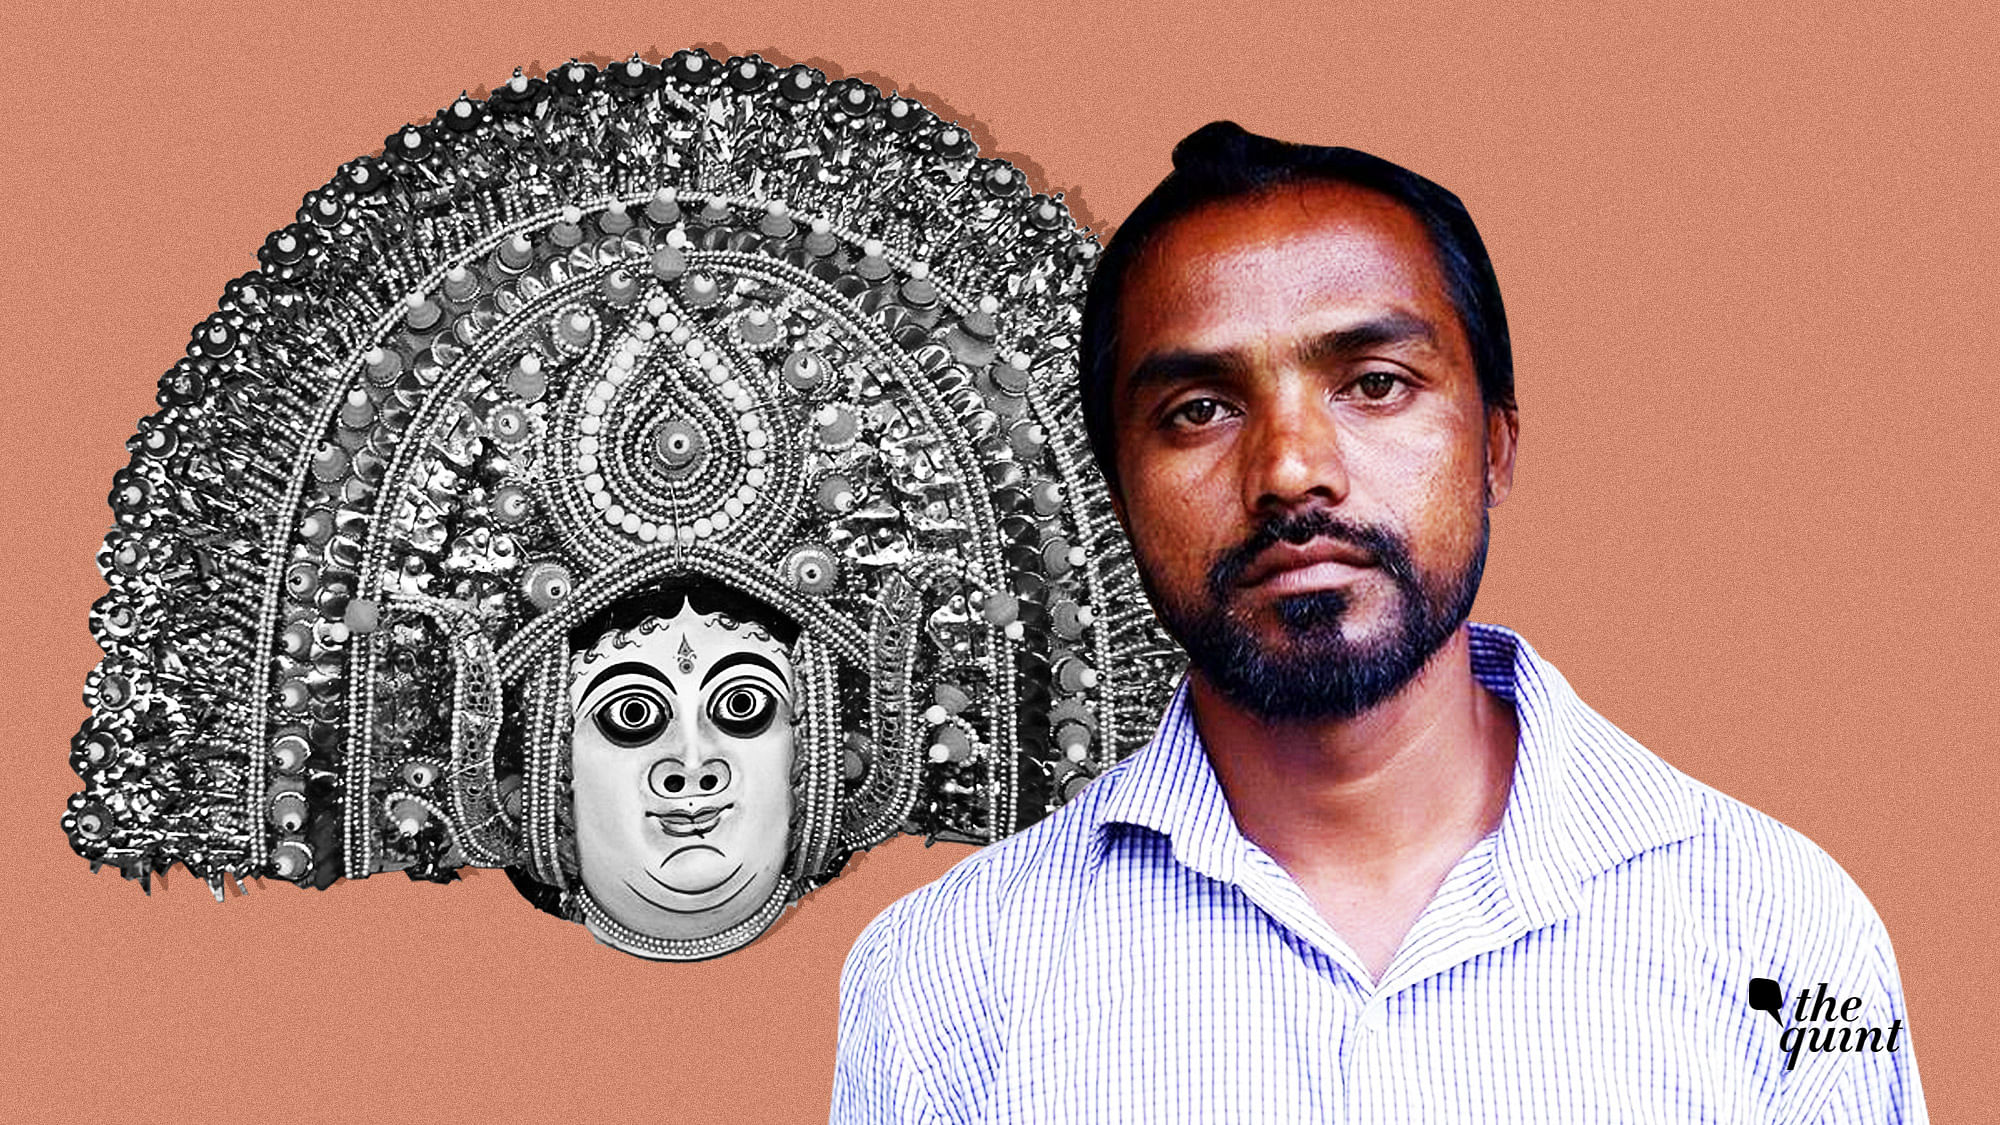 Image of Jeetrai Hansda, the tribal professor and activist who was arrested recently, and a Chau mask, used for representational purposes.